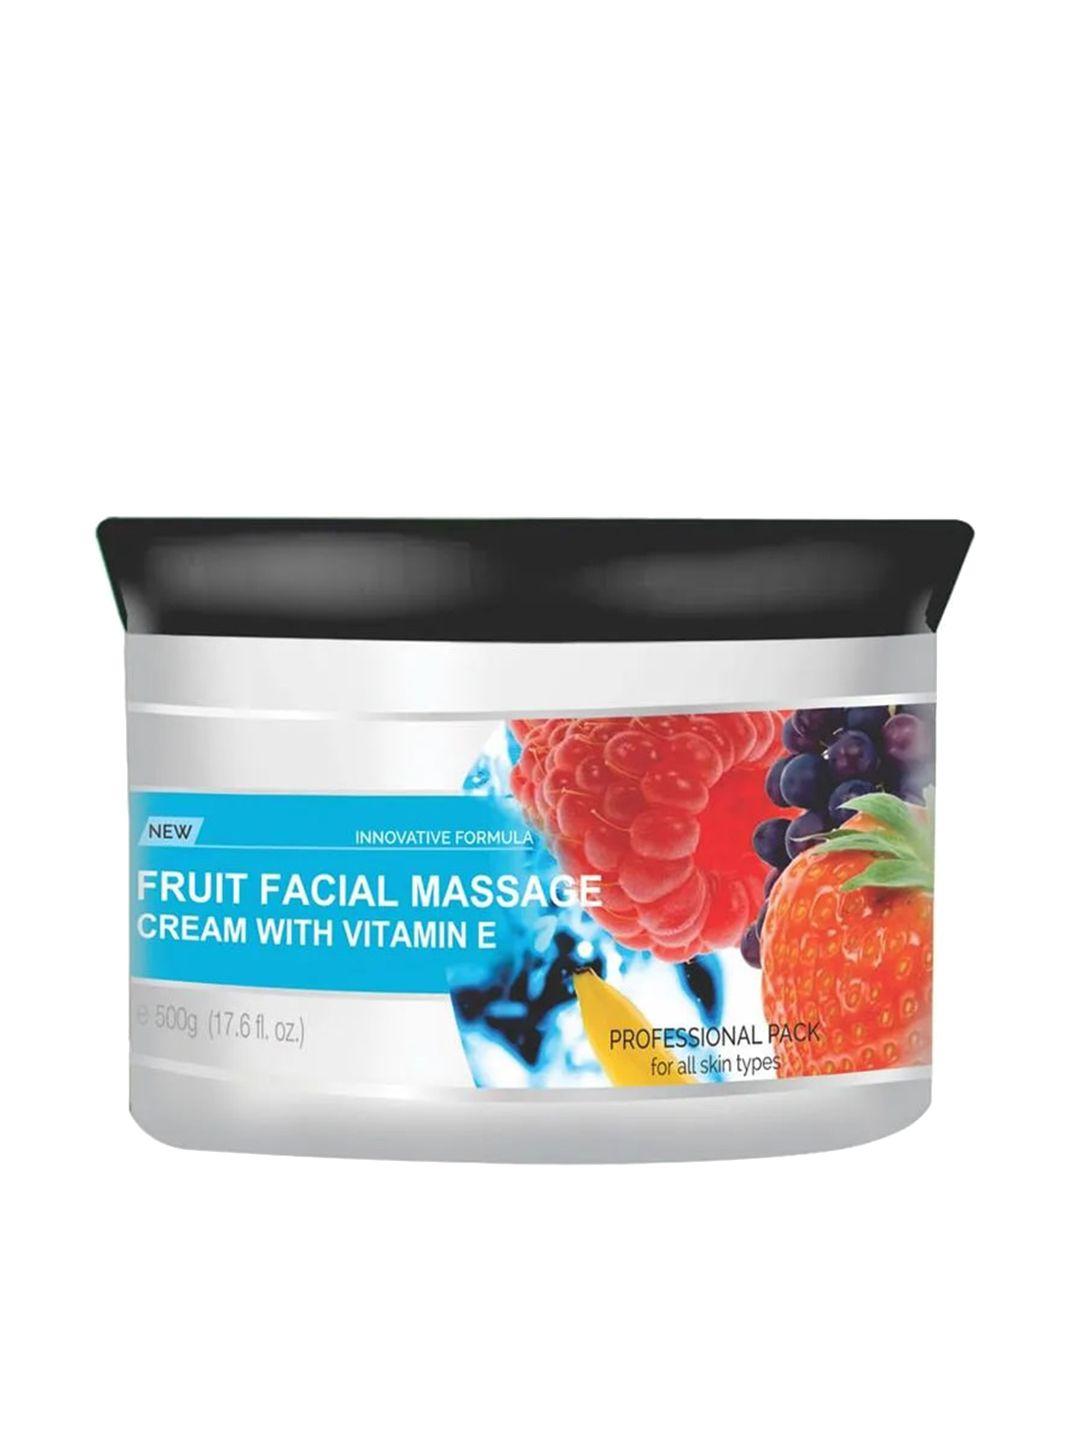 oxyglow fruit facial massage cream with vitamin e - 500g